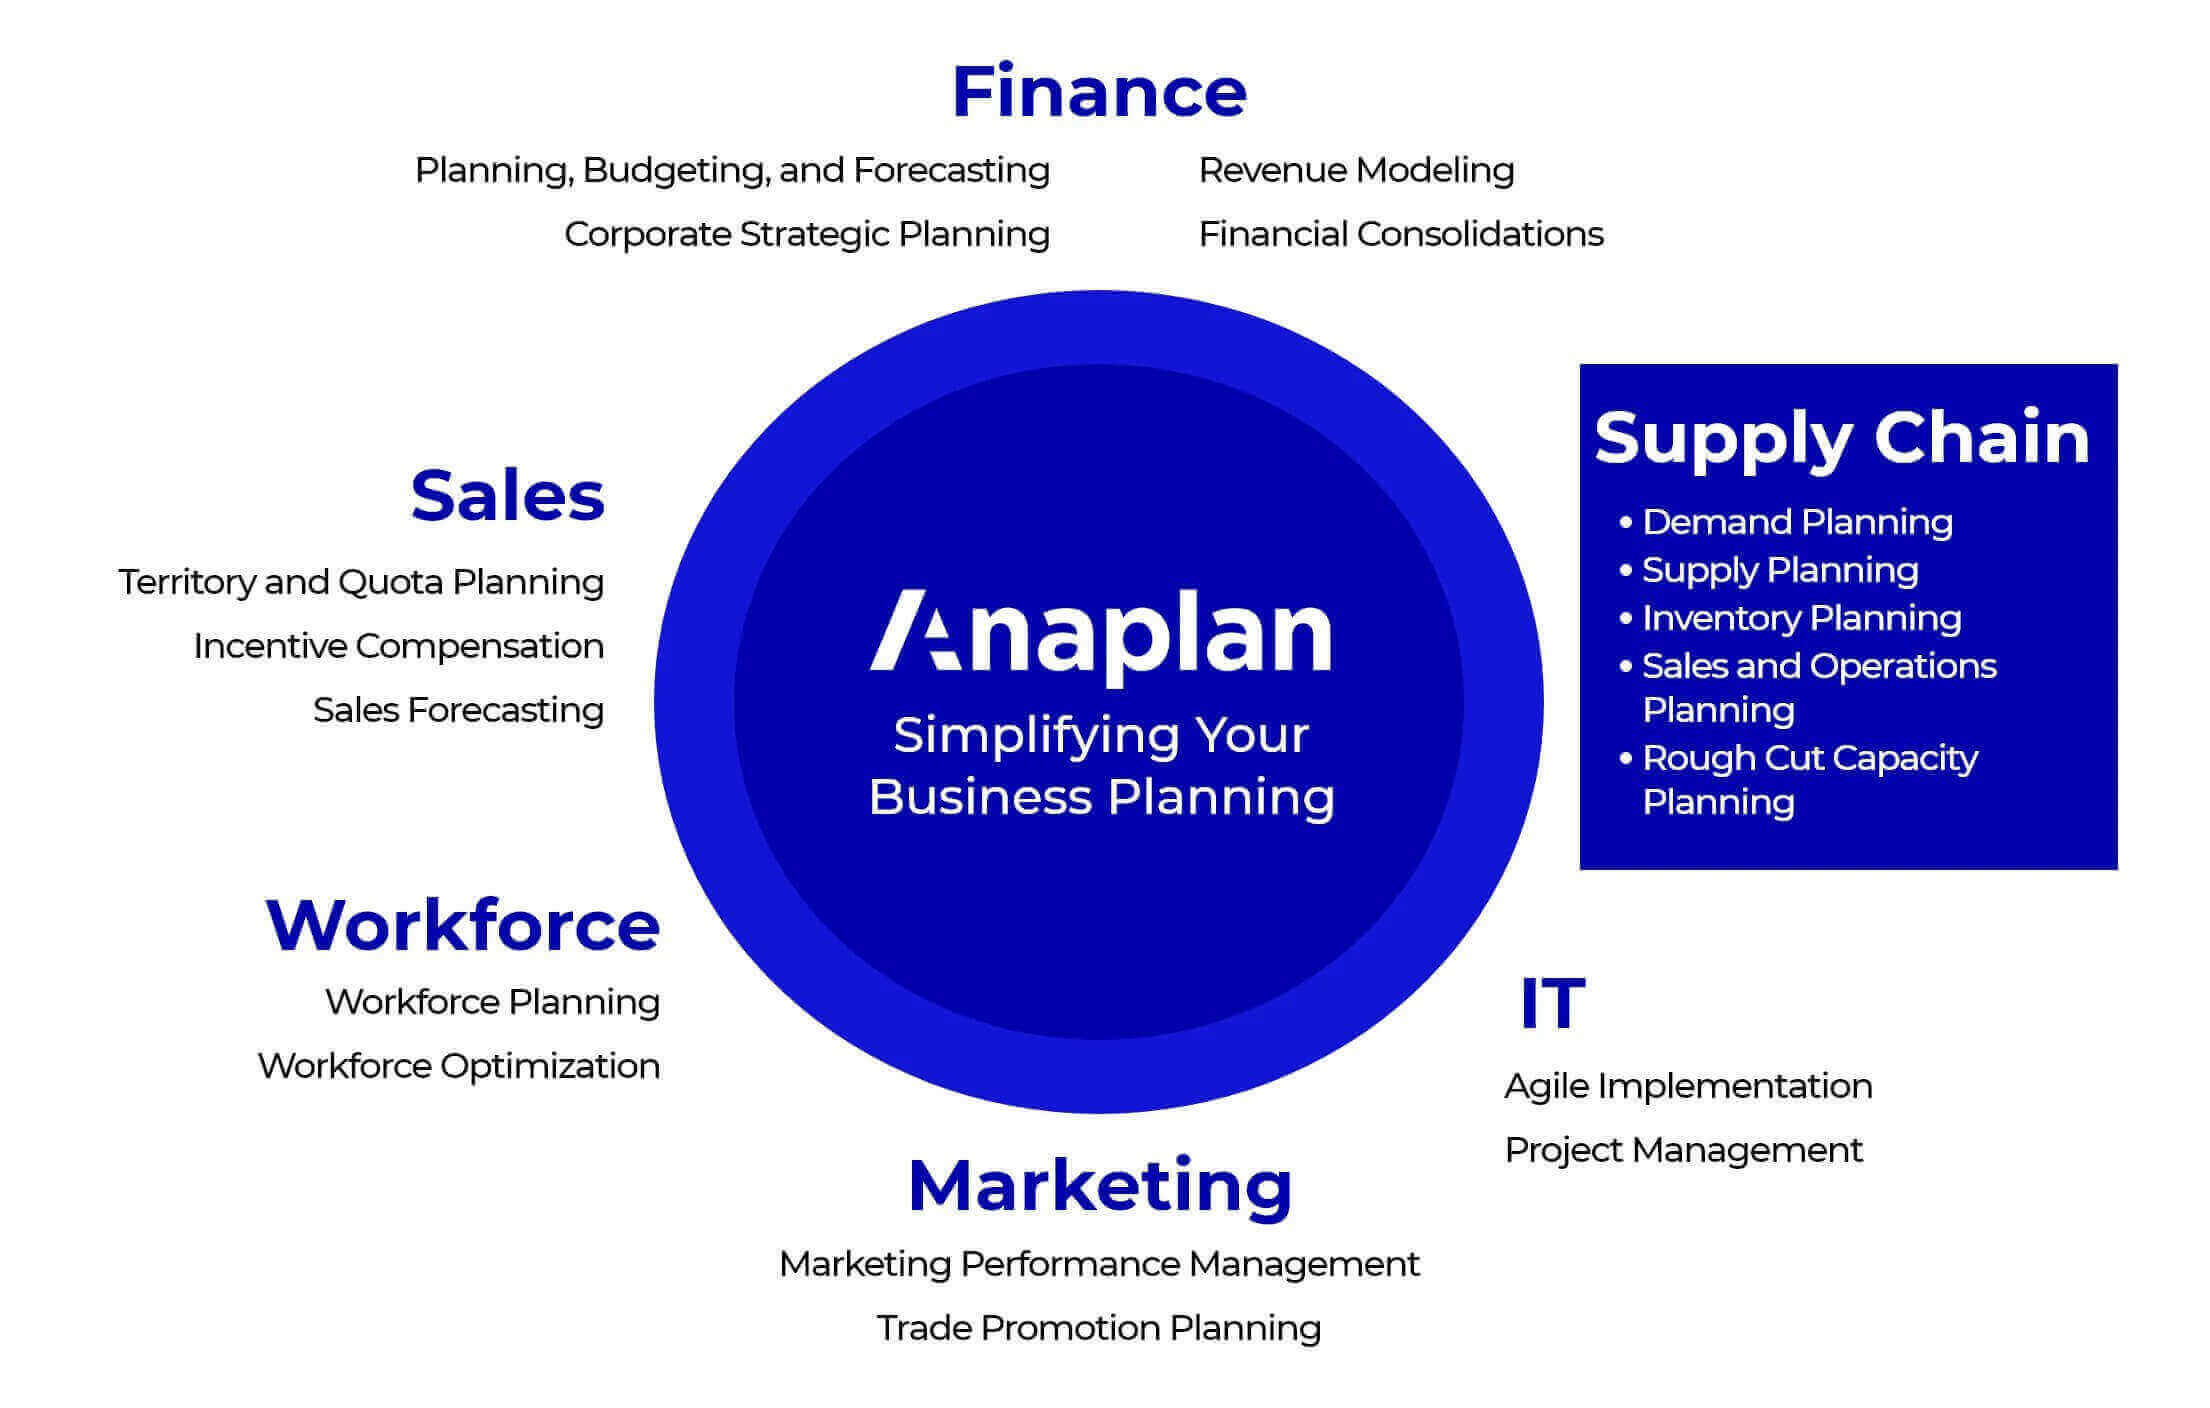 Anaplan simplifying your business supply chain network - Infographic Image 